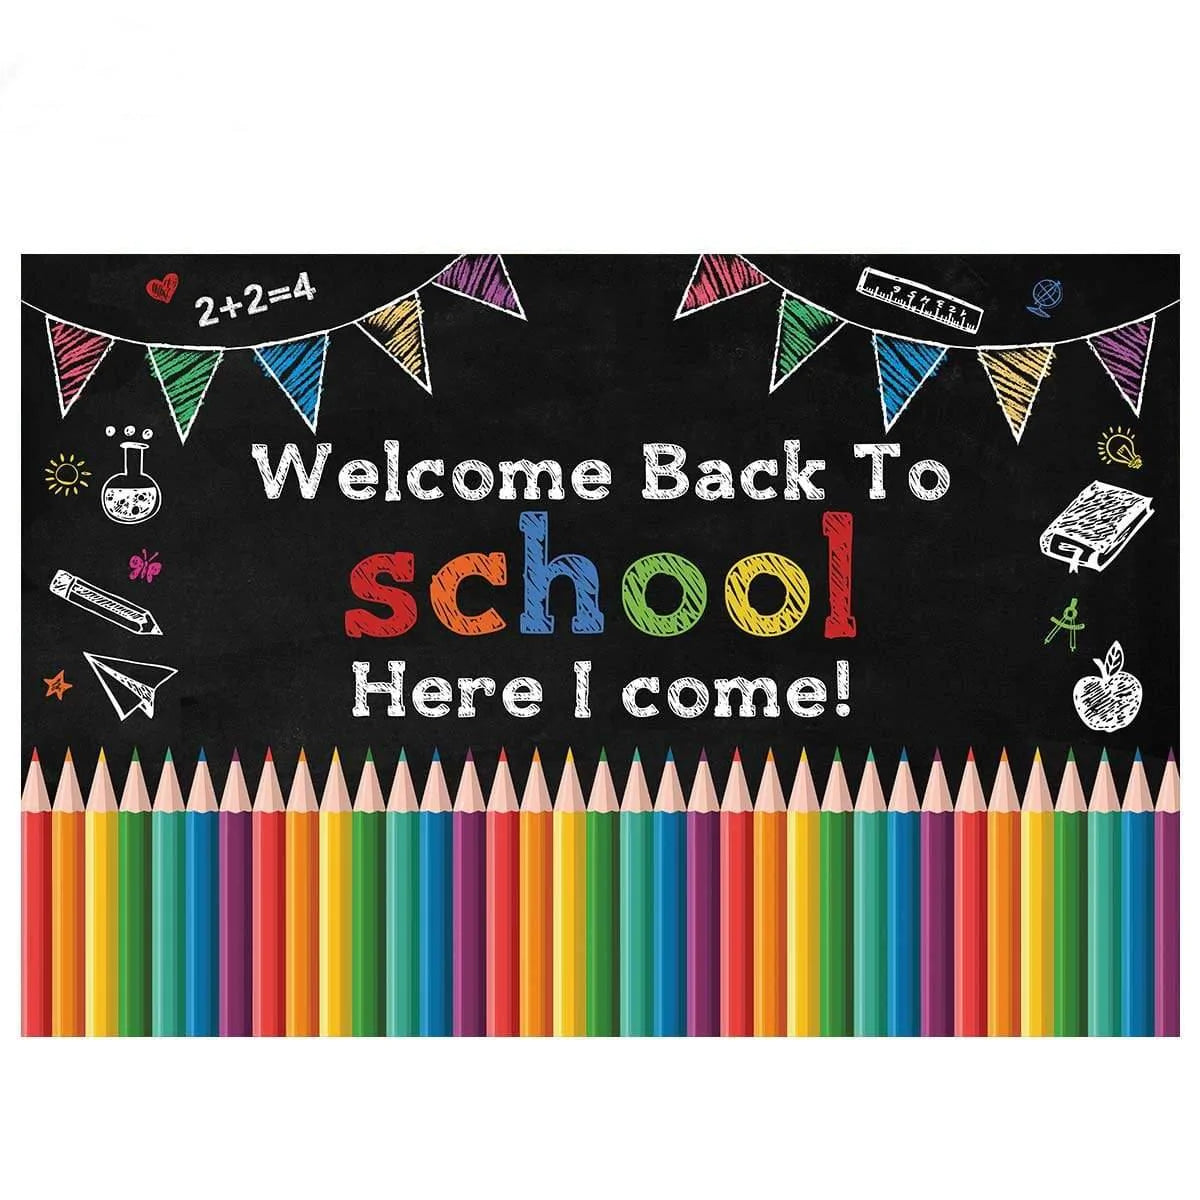 Allenjoy Welcome Back To School Here I come Colorful Pencil Backdrop - Allenjoystudio